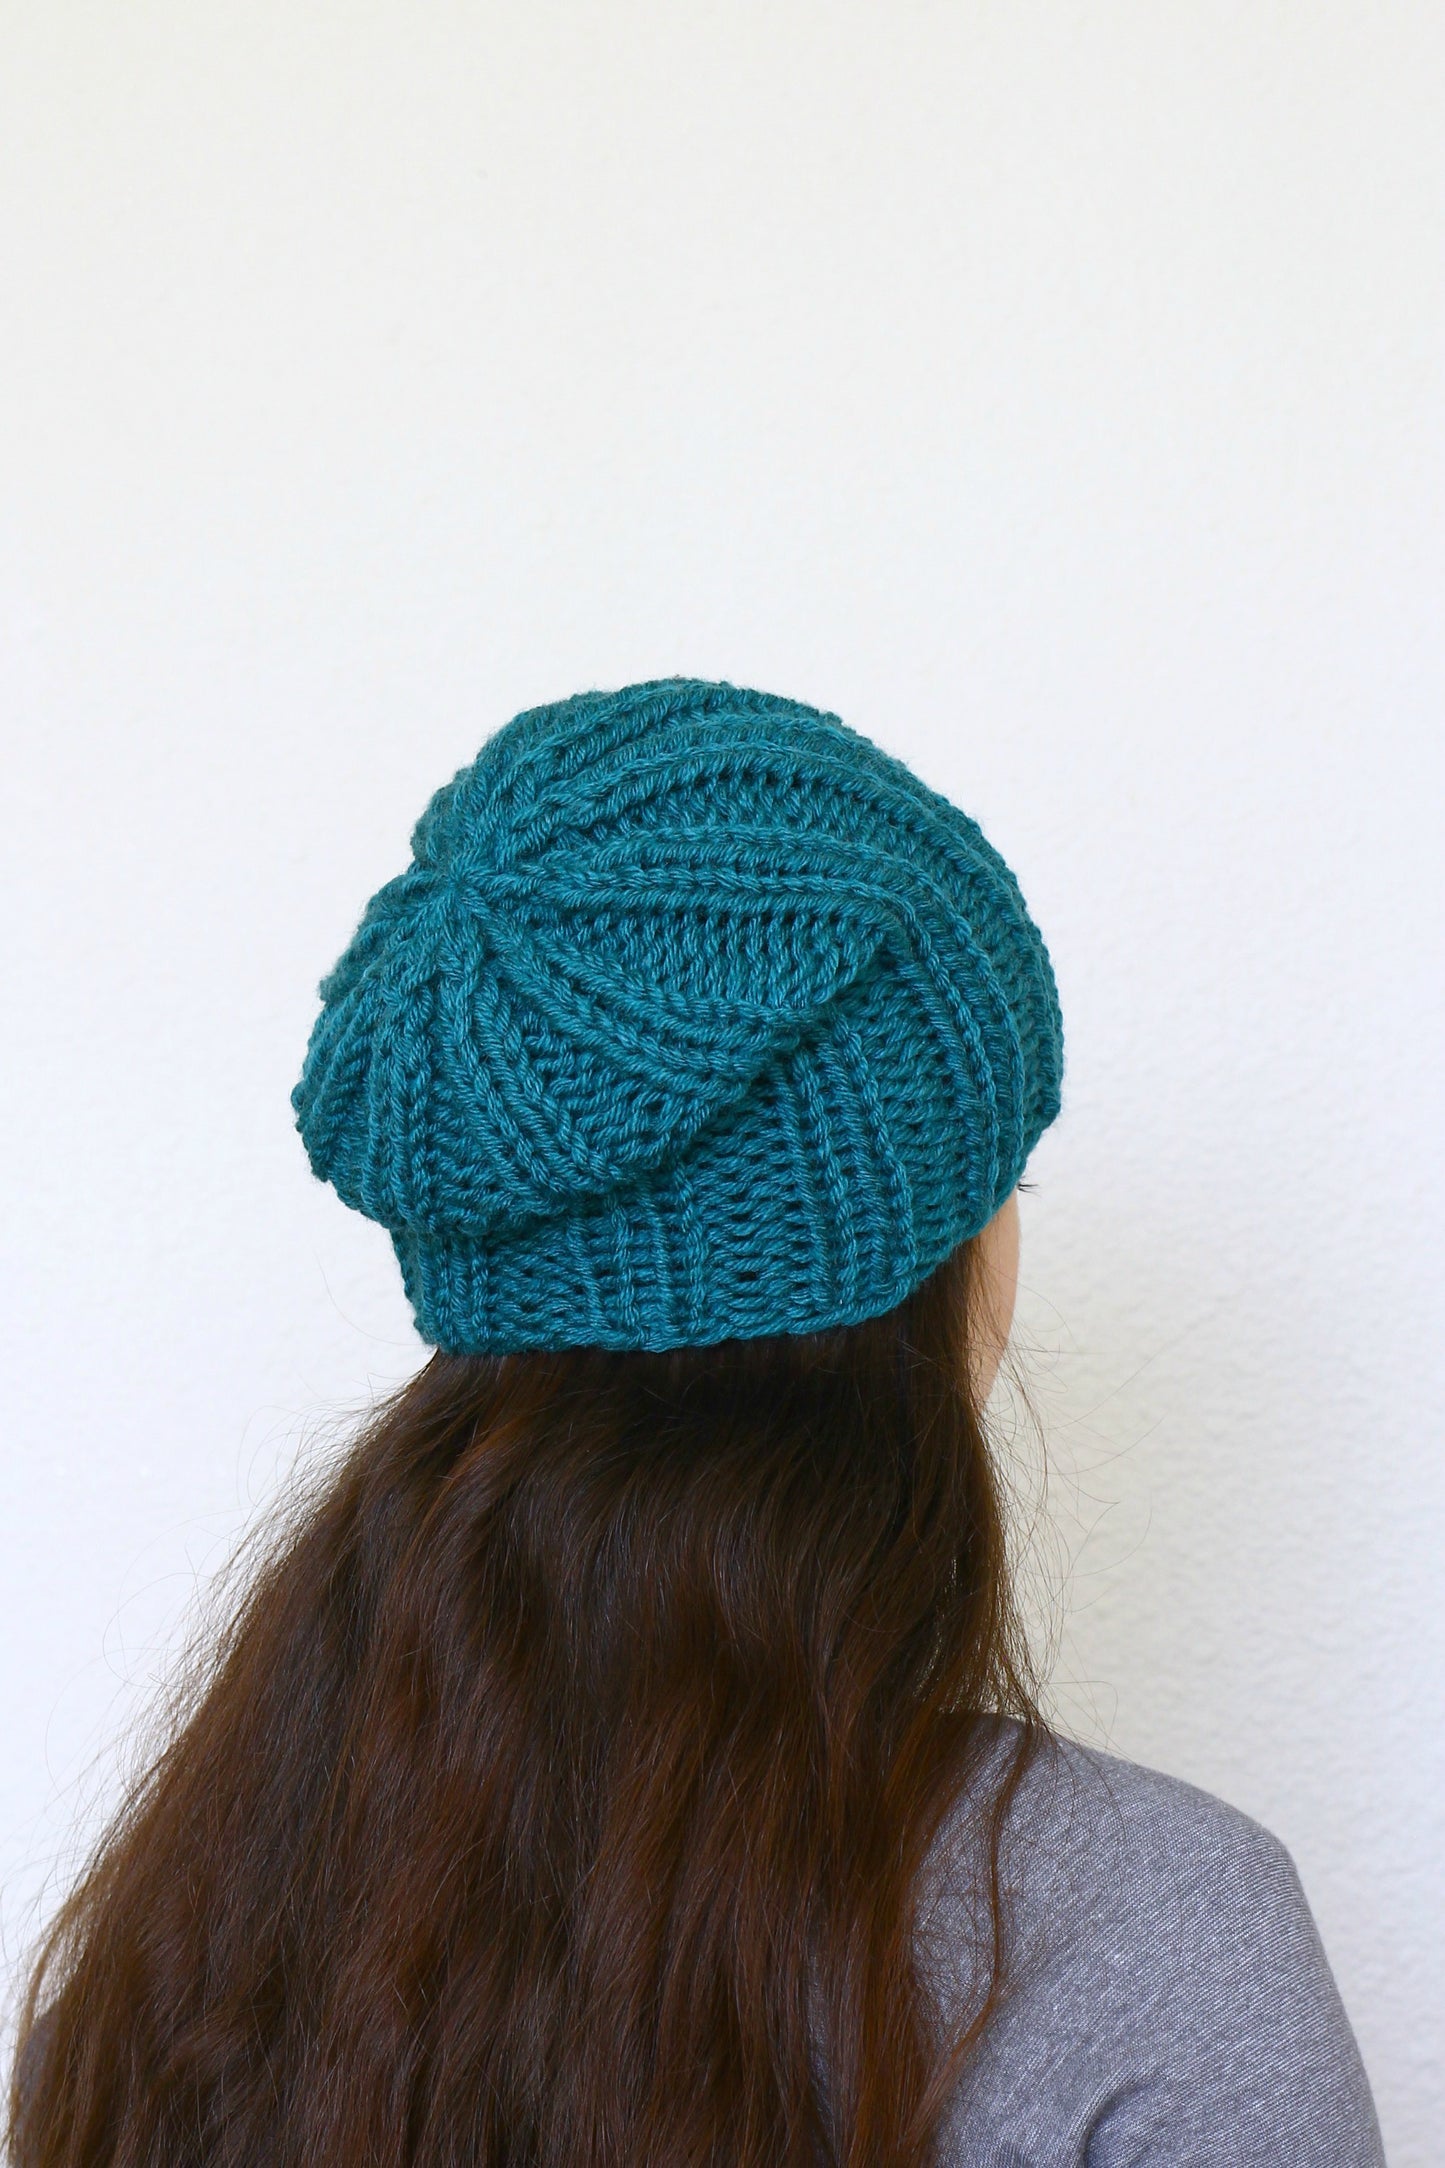 Knit beanie hat, slouchy hat in teal blue color